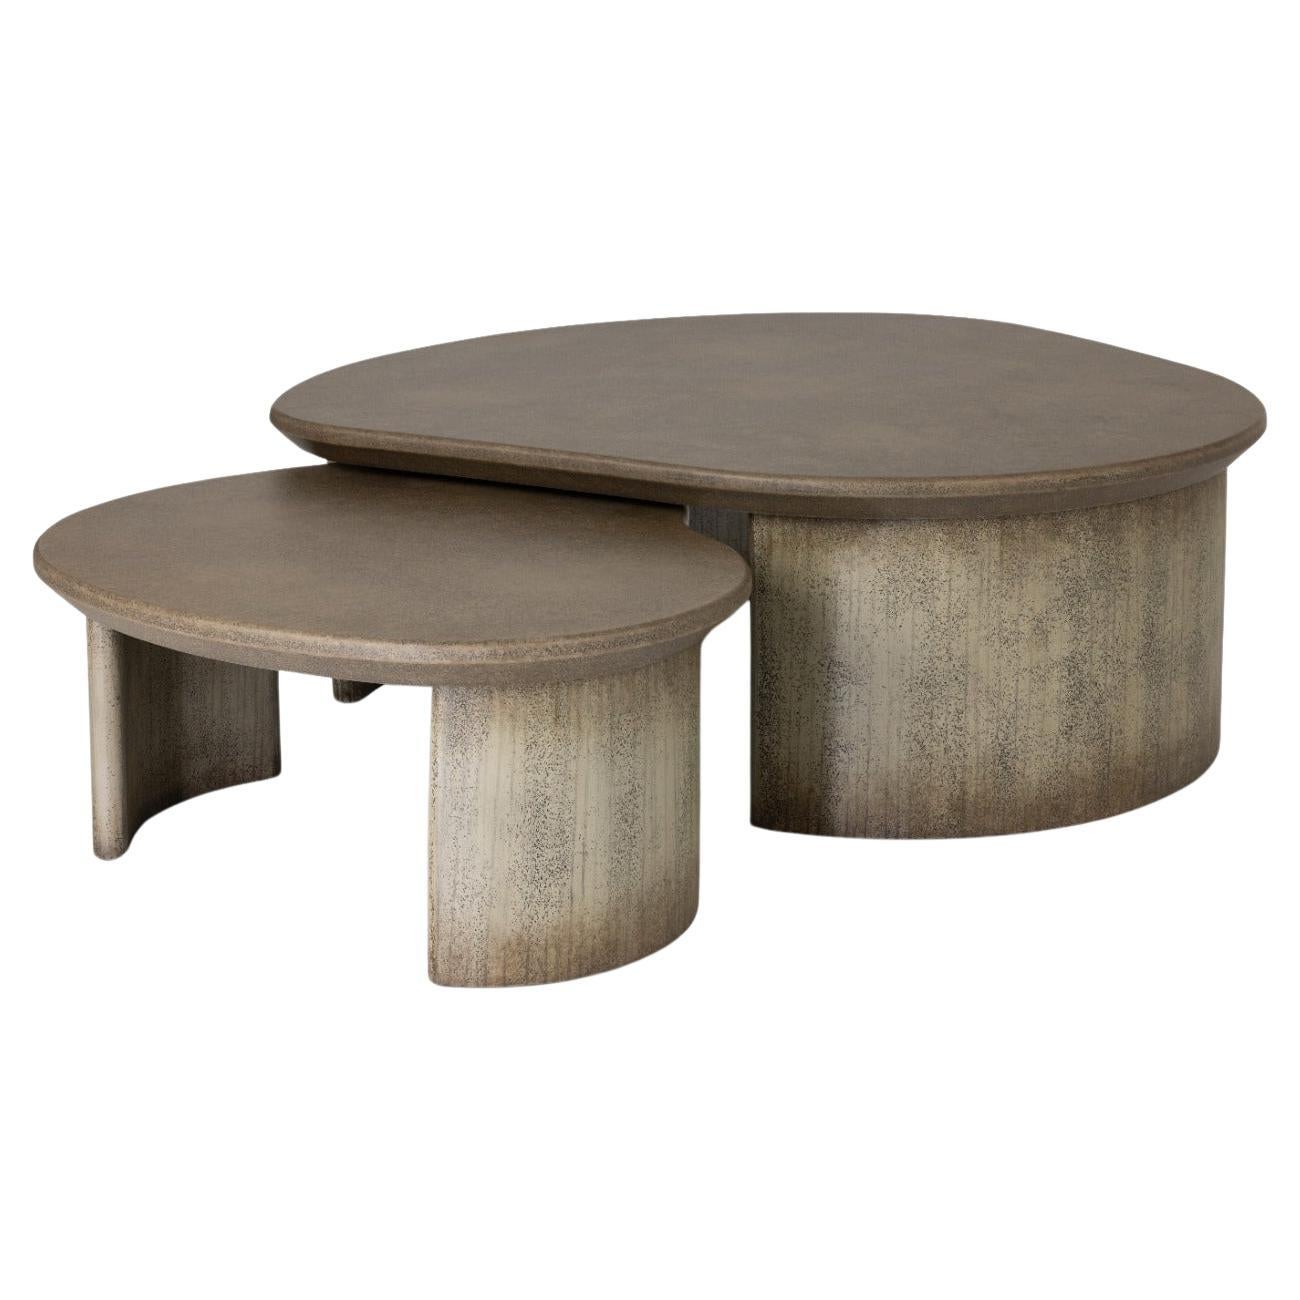 Coffee Table, Lacquered Wood in Handmade Textured Finish, Amorphous 